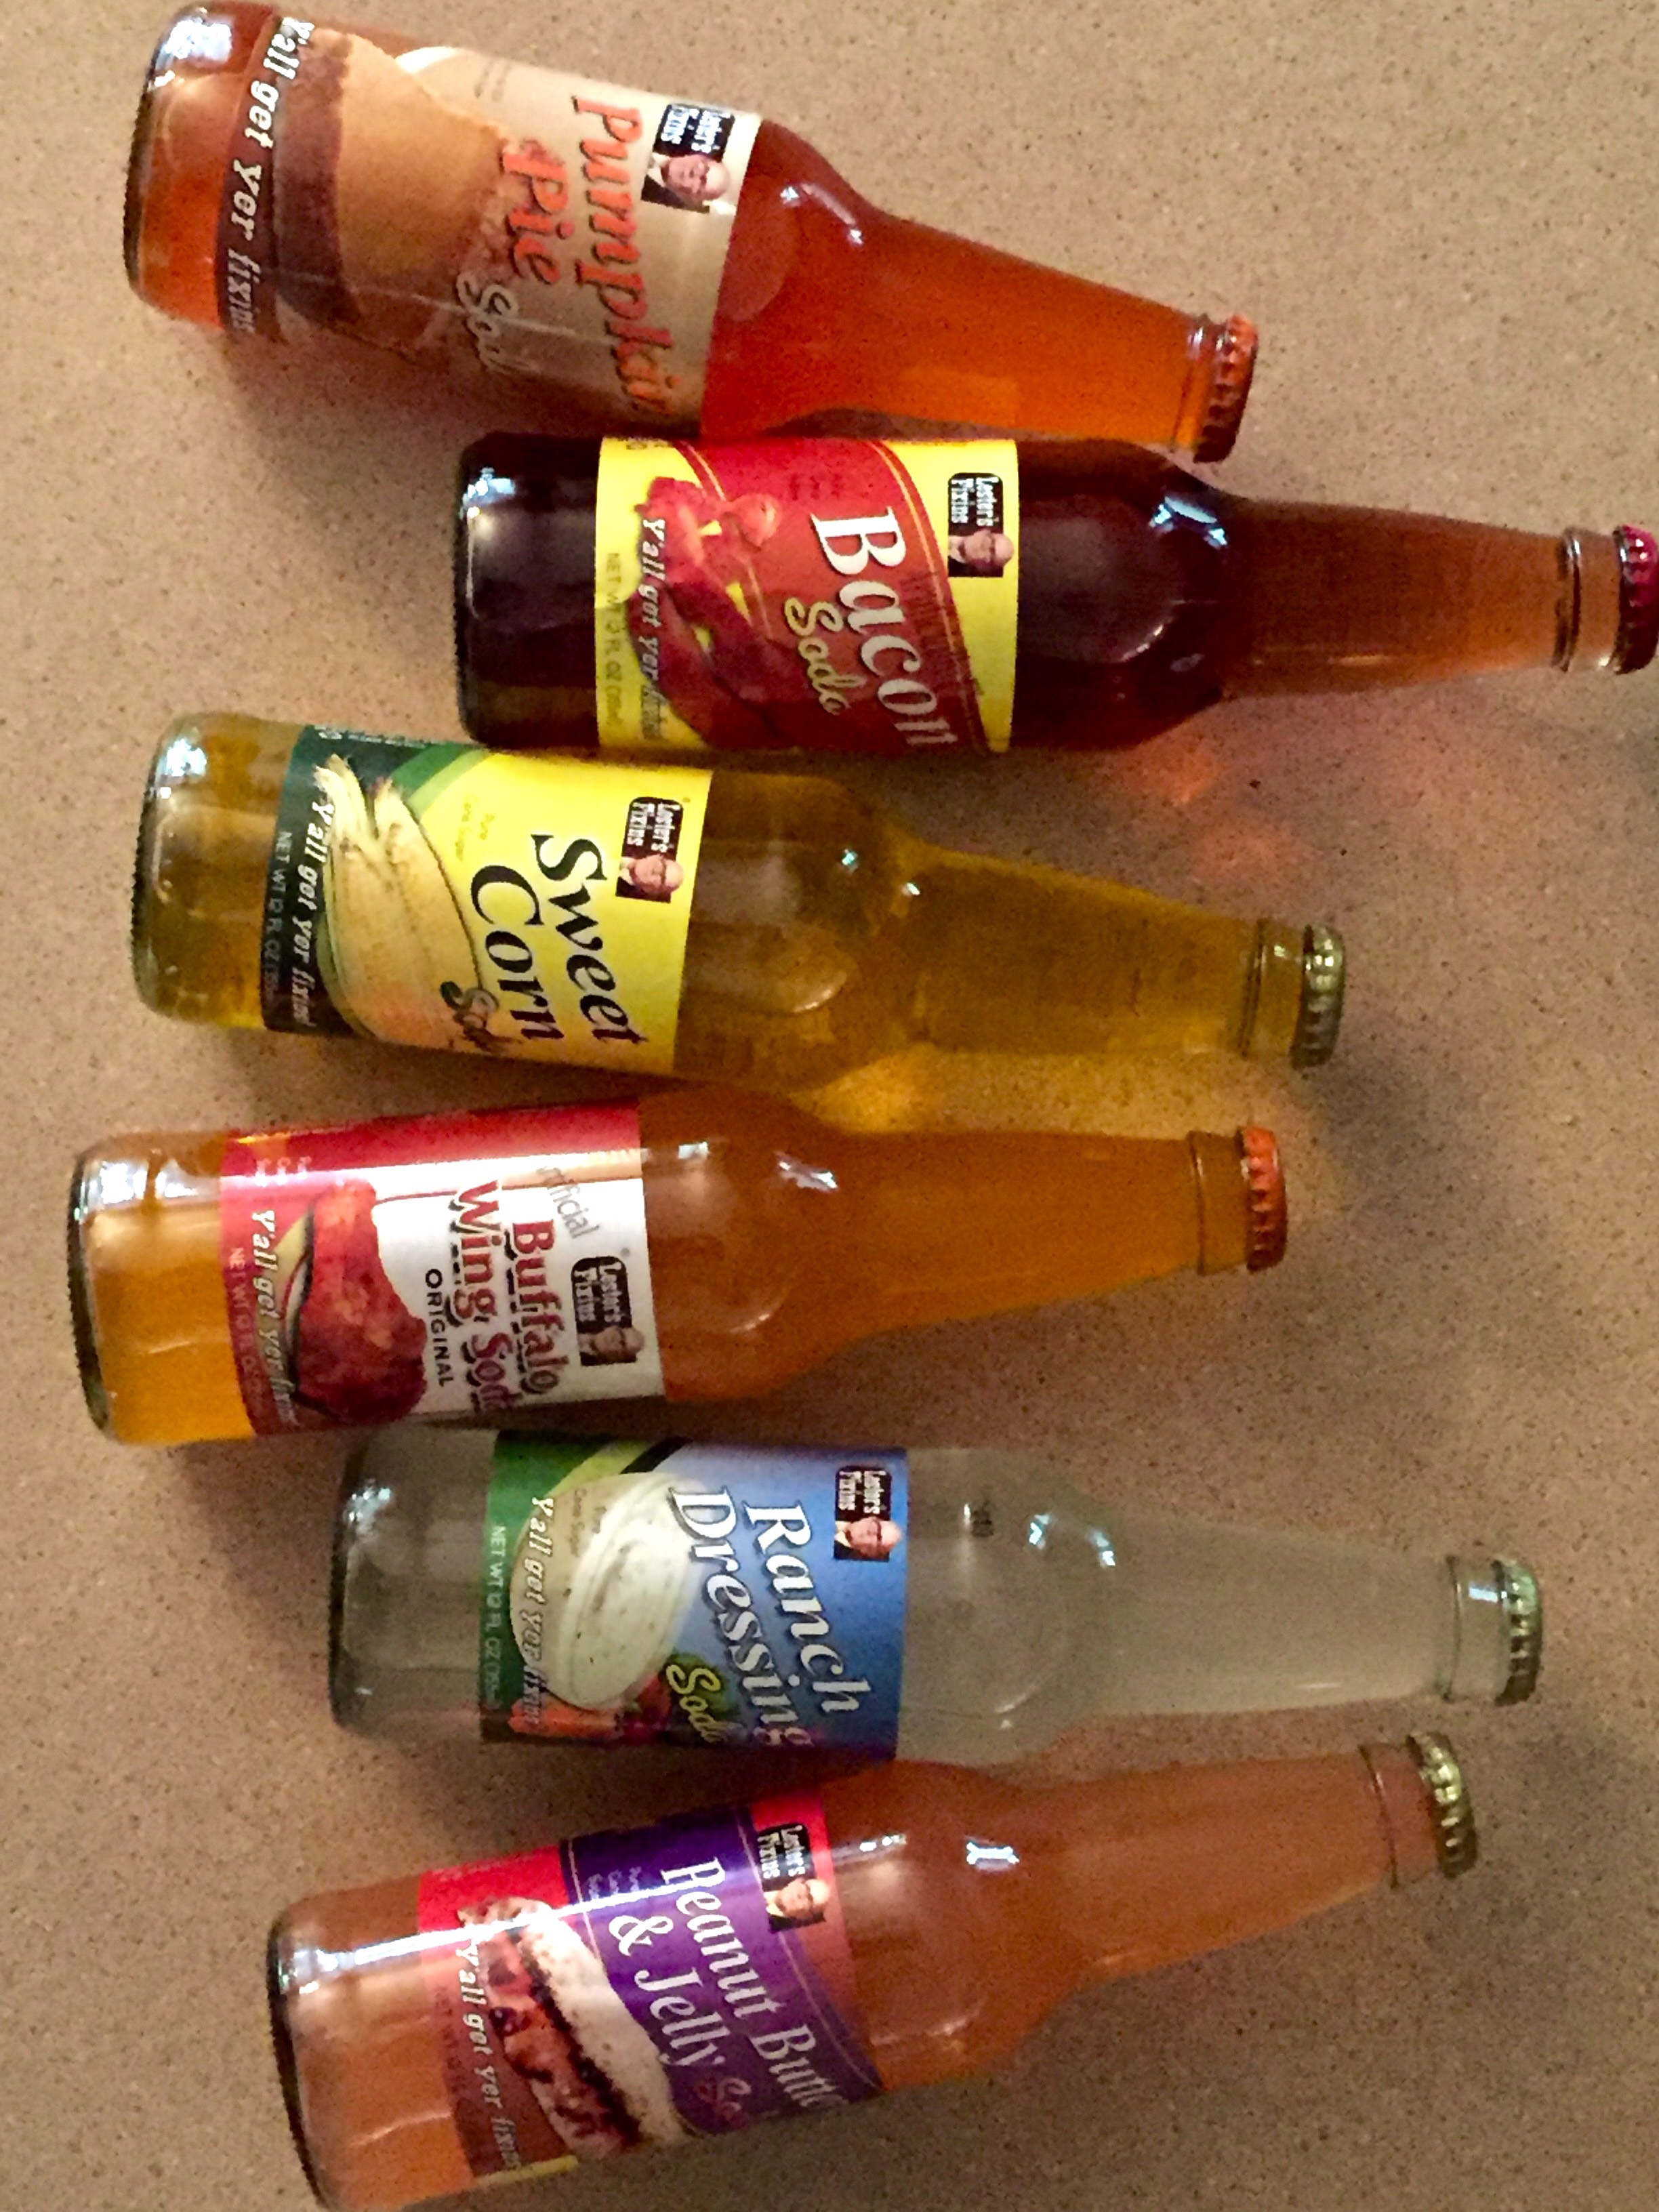 The Ranch Dressing Soda Review You Never Wanted: Lester's Fixins